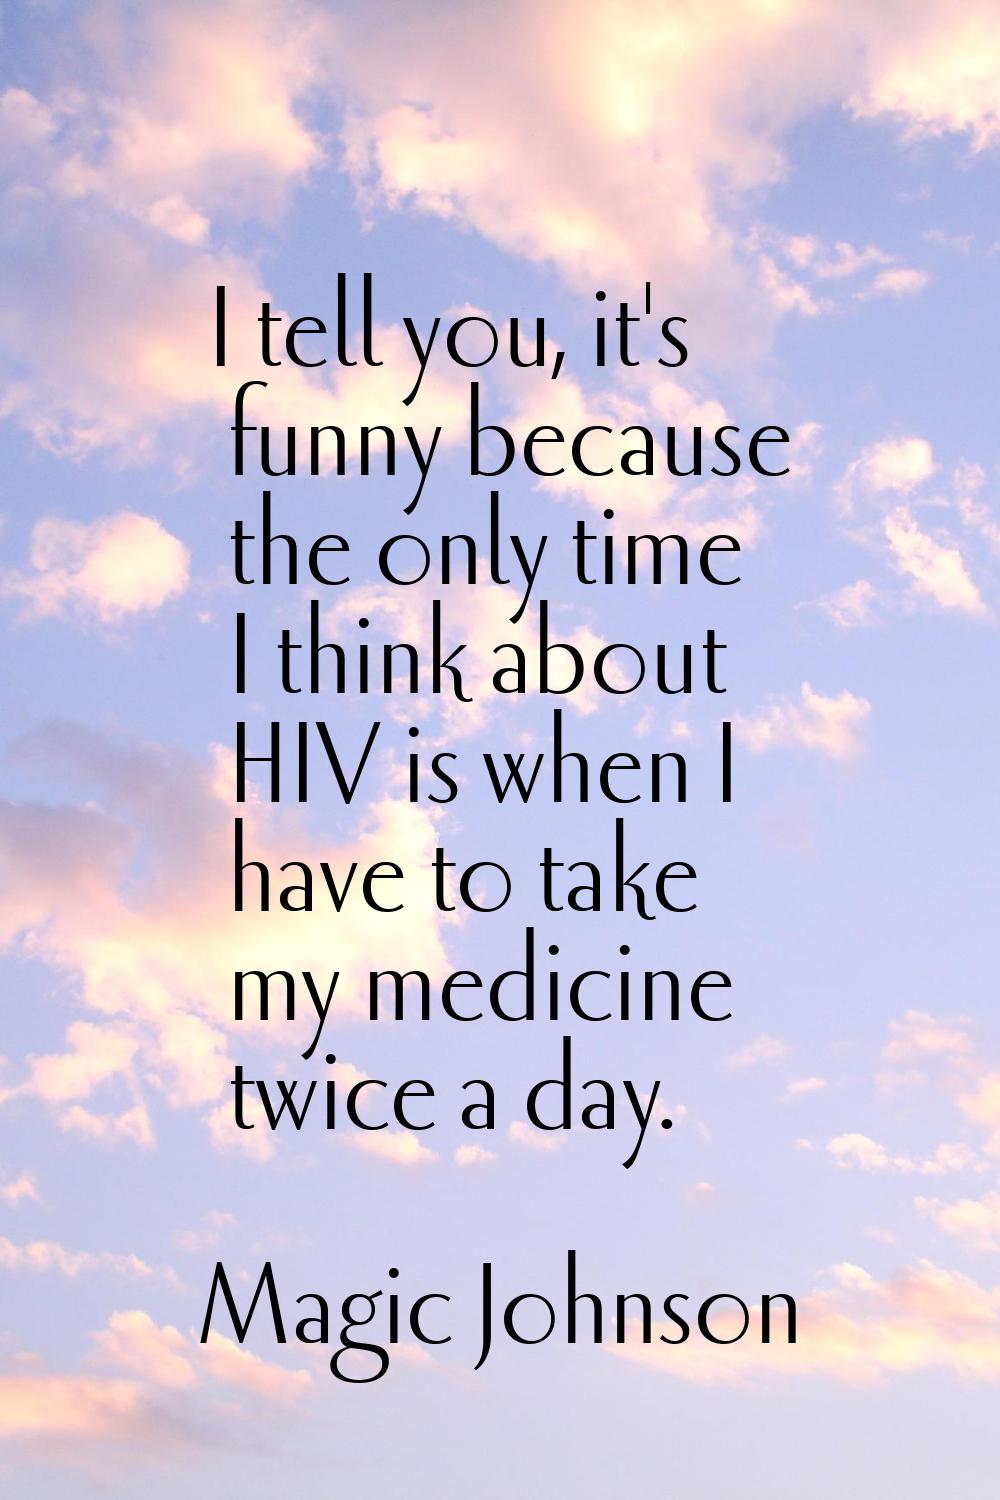 I tell you, it's funny because the only time I think about HIV is when I have to take my medicine t